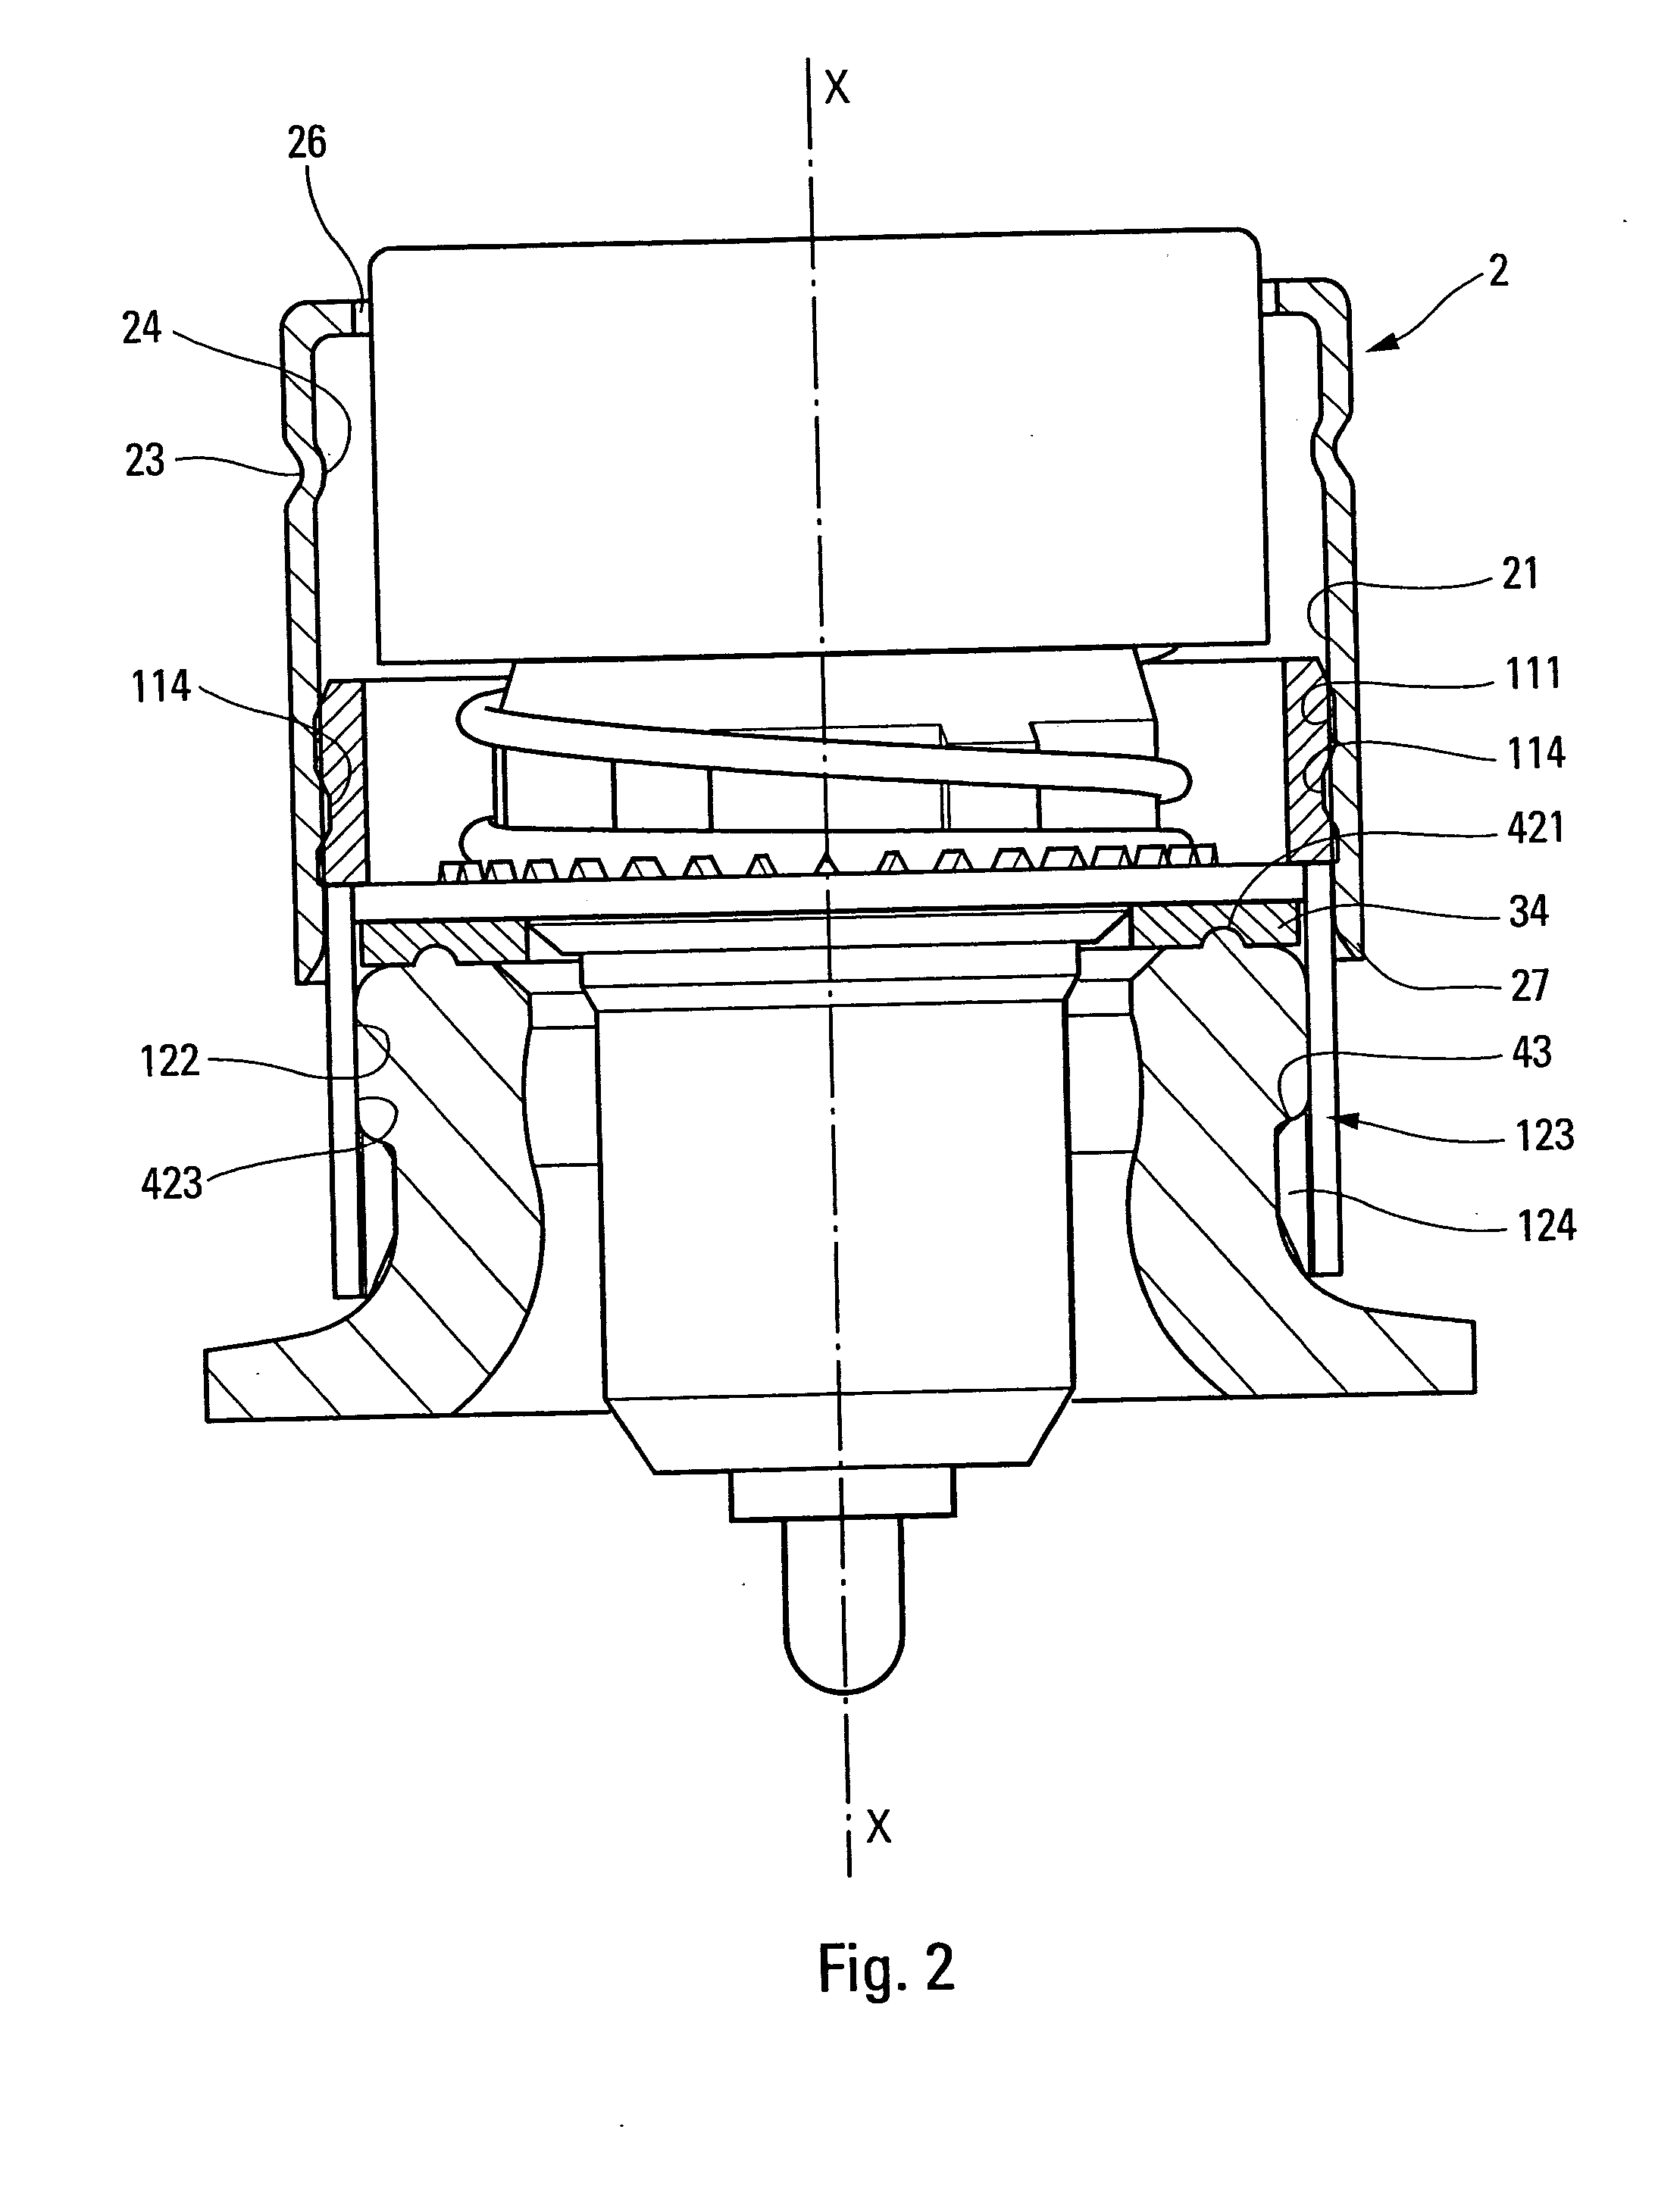 Fixing device and a fitting method for fixing a dispenser member to a reservoir opening